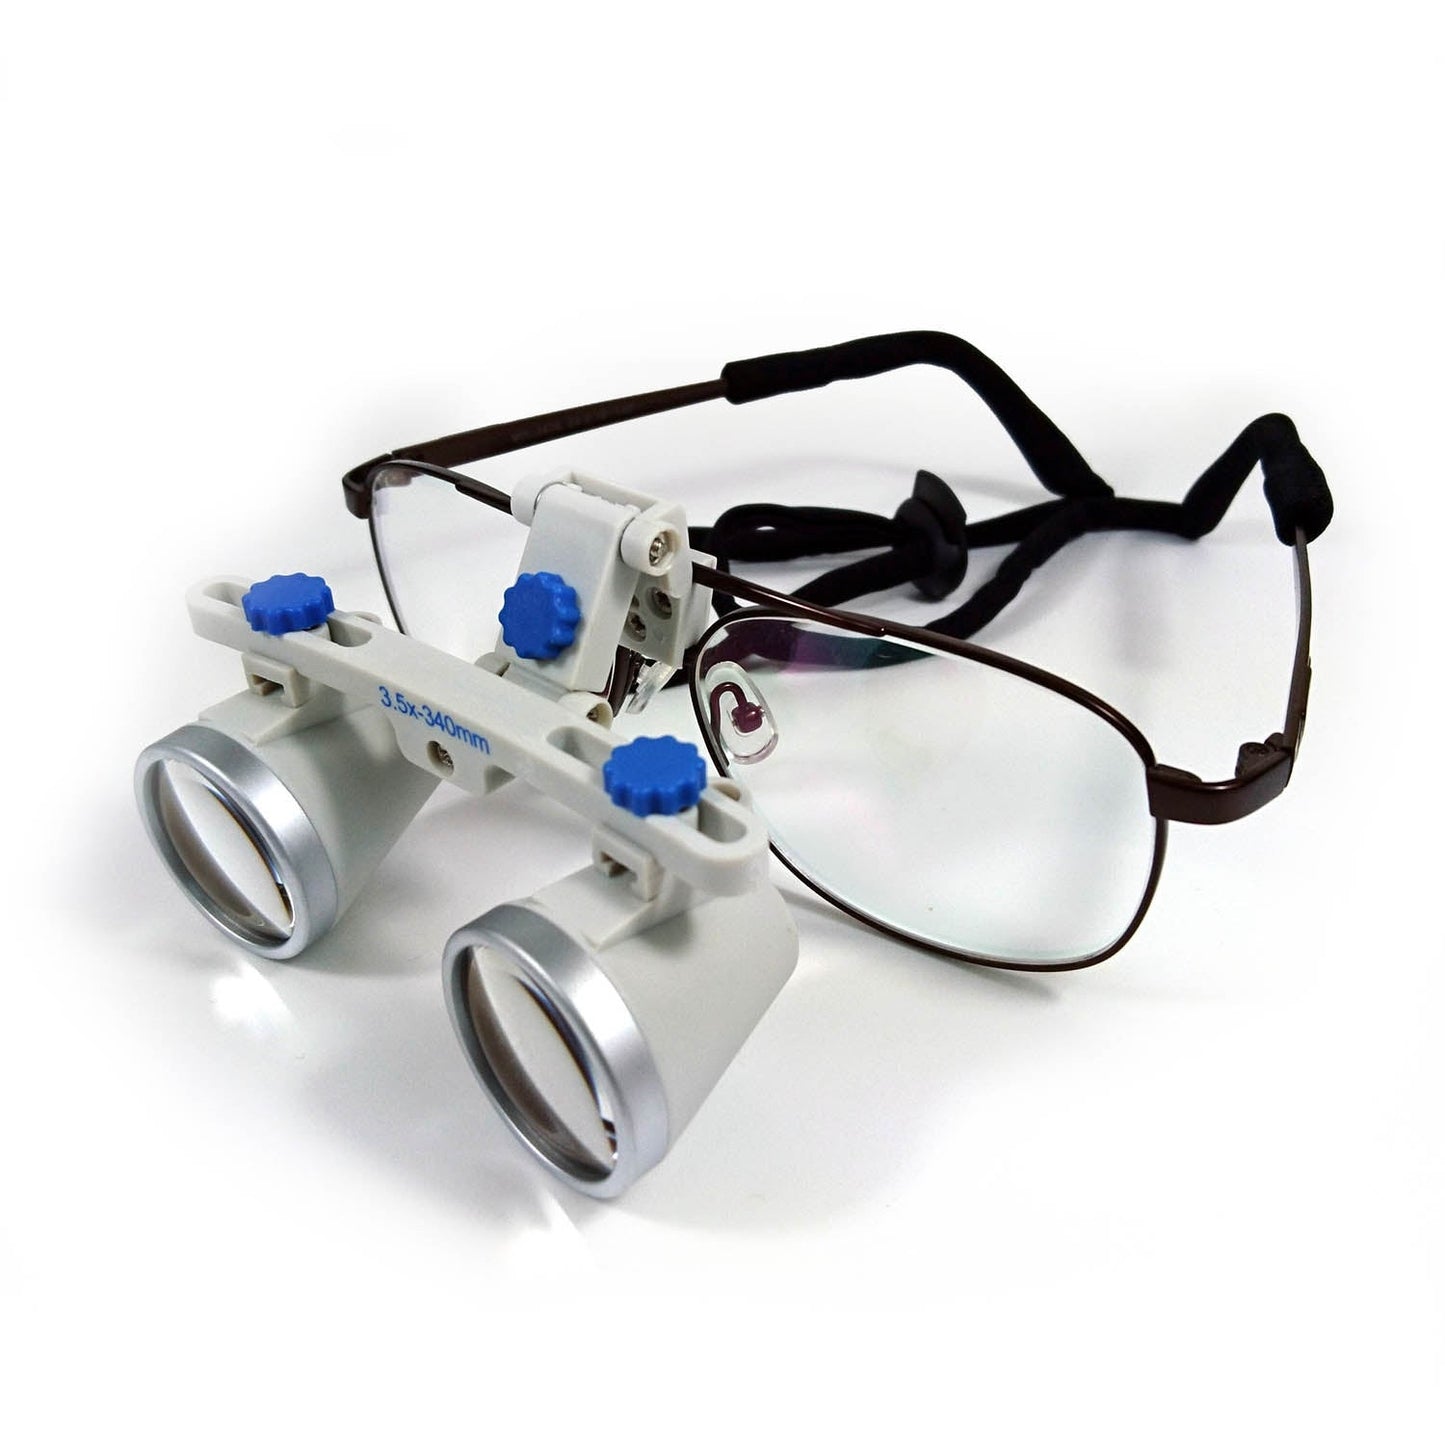 Daray Loupes: 3.5x Magnification; 420mm Focal Length